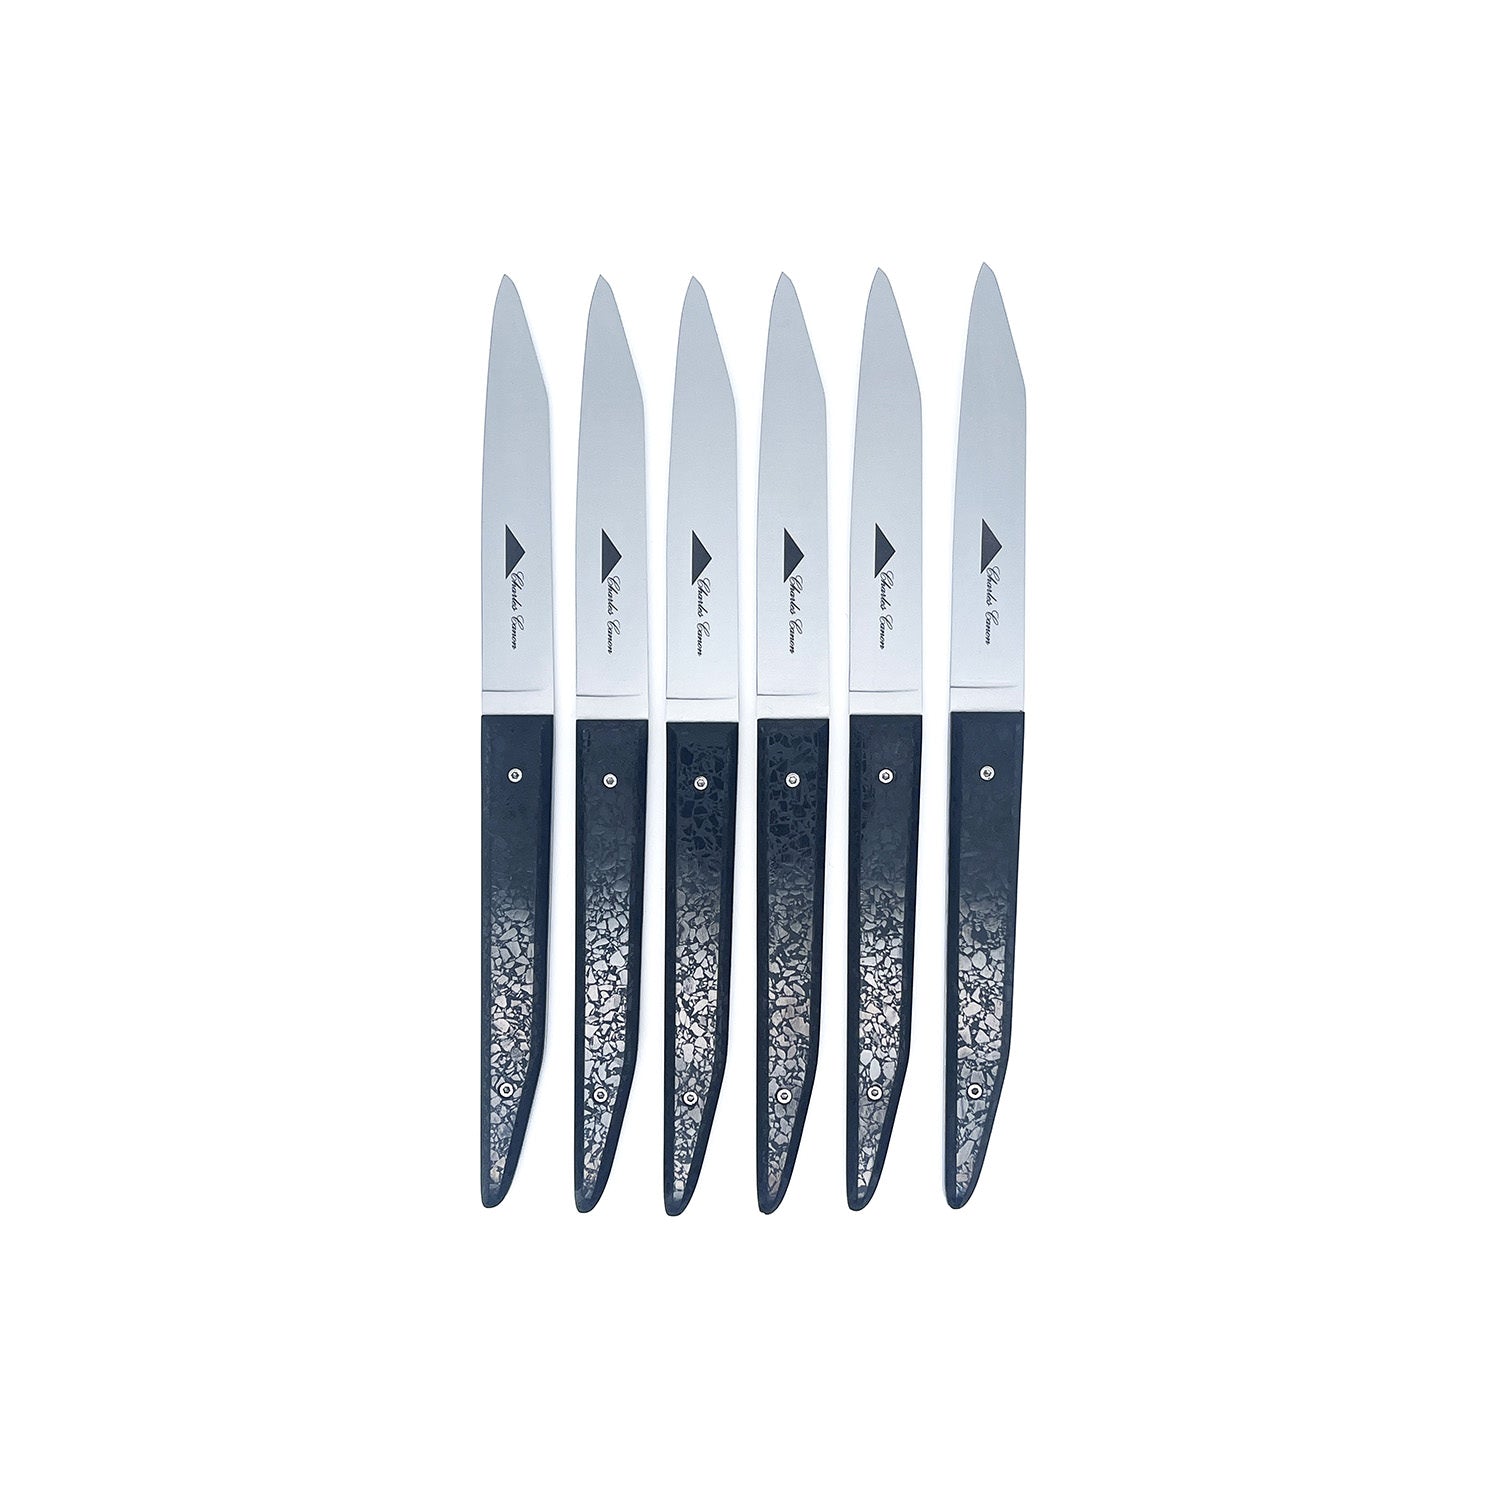 6 Table knives with polished charcoal handles